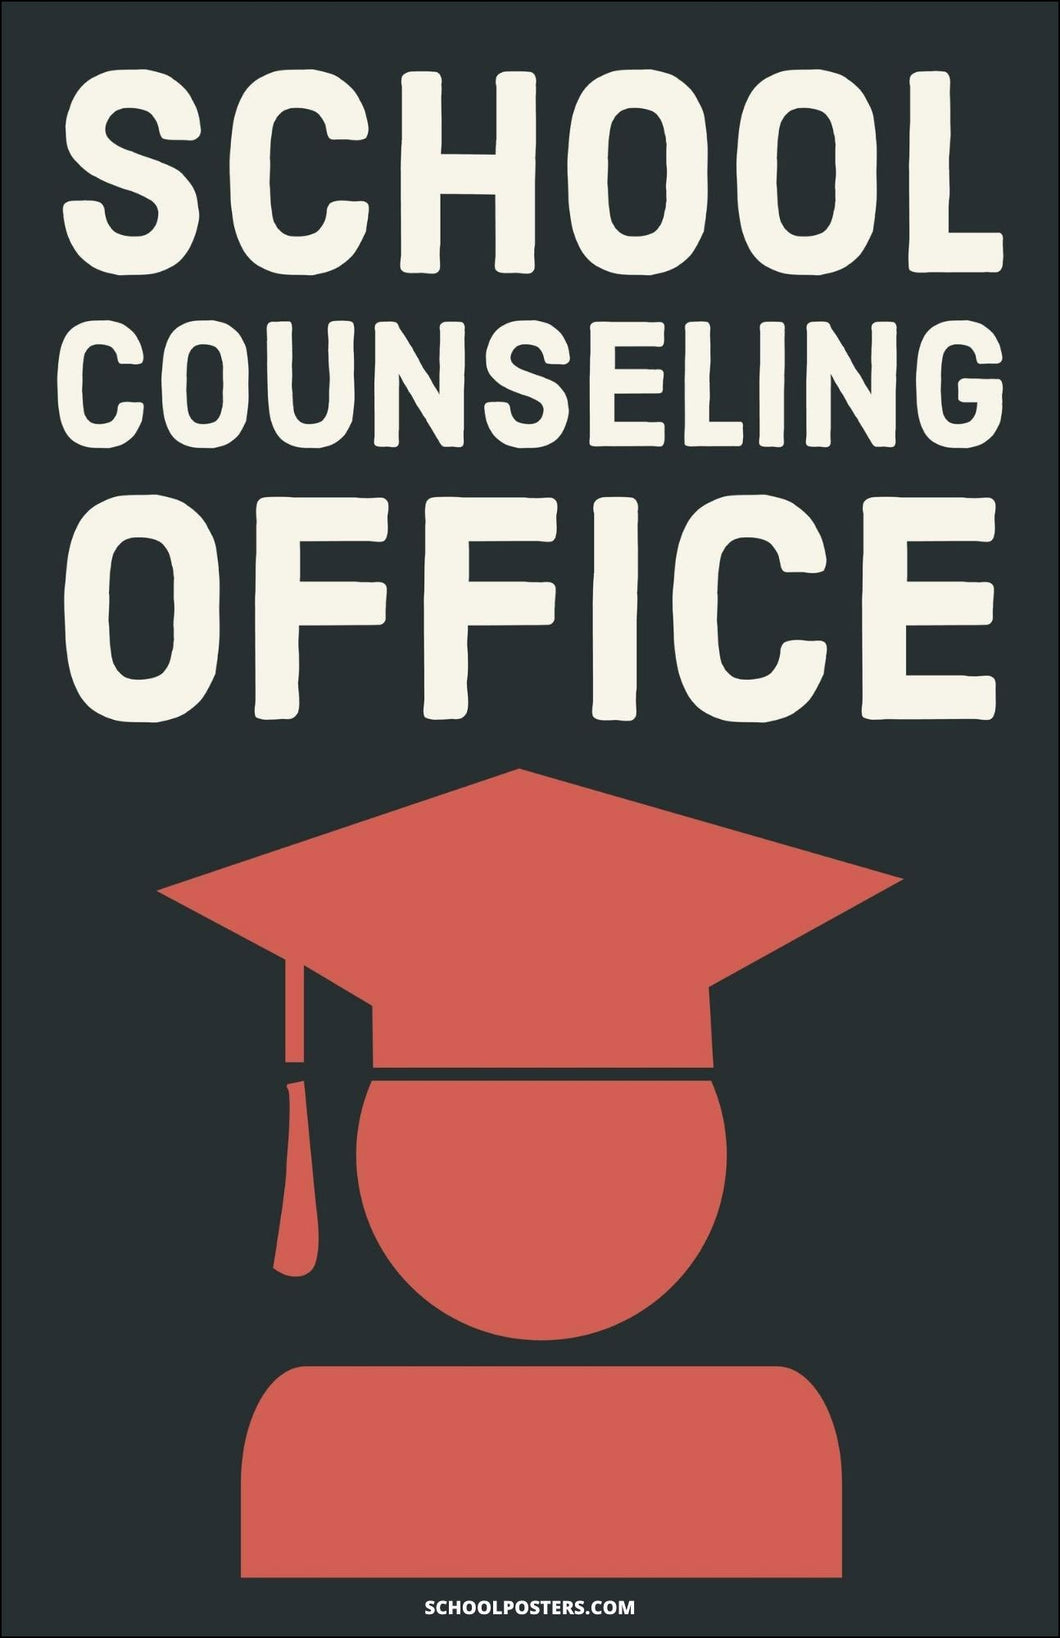 School Counseling Office Poster